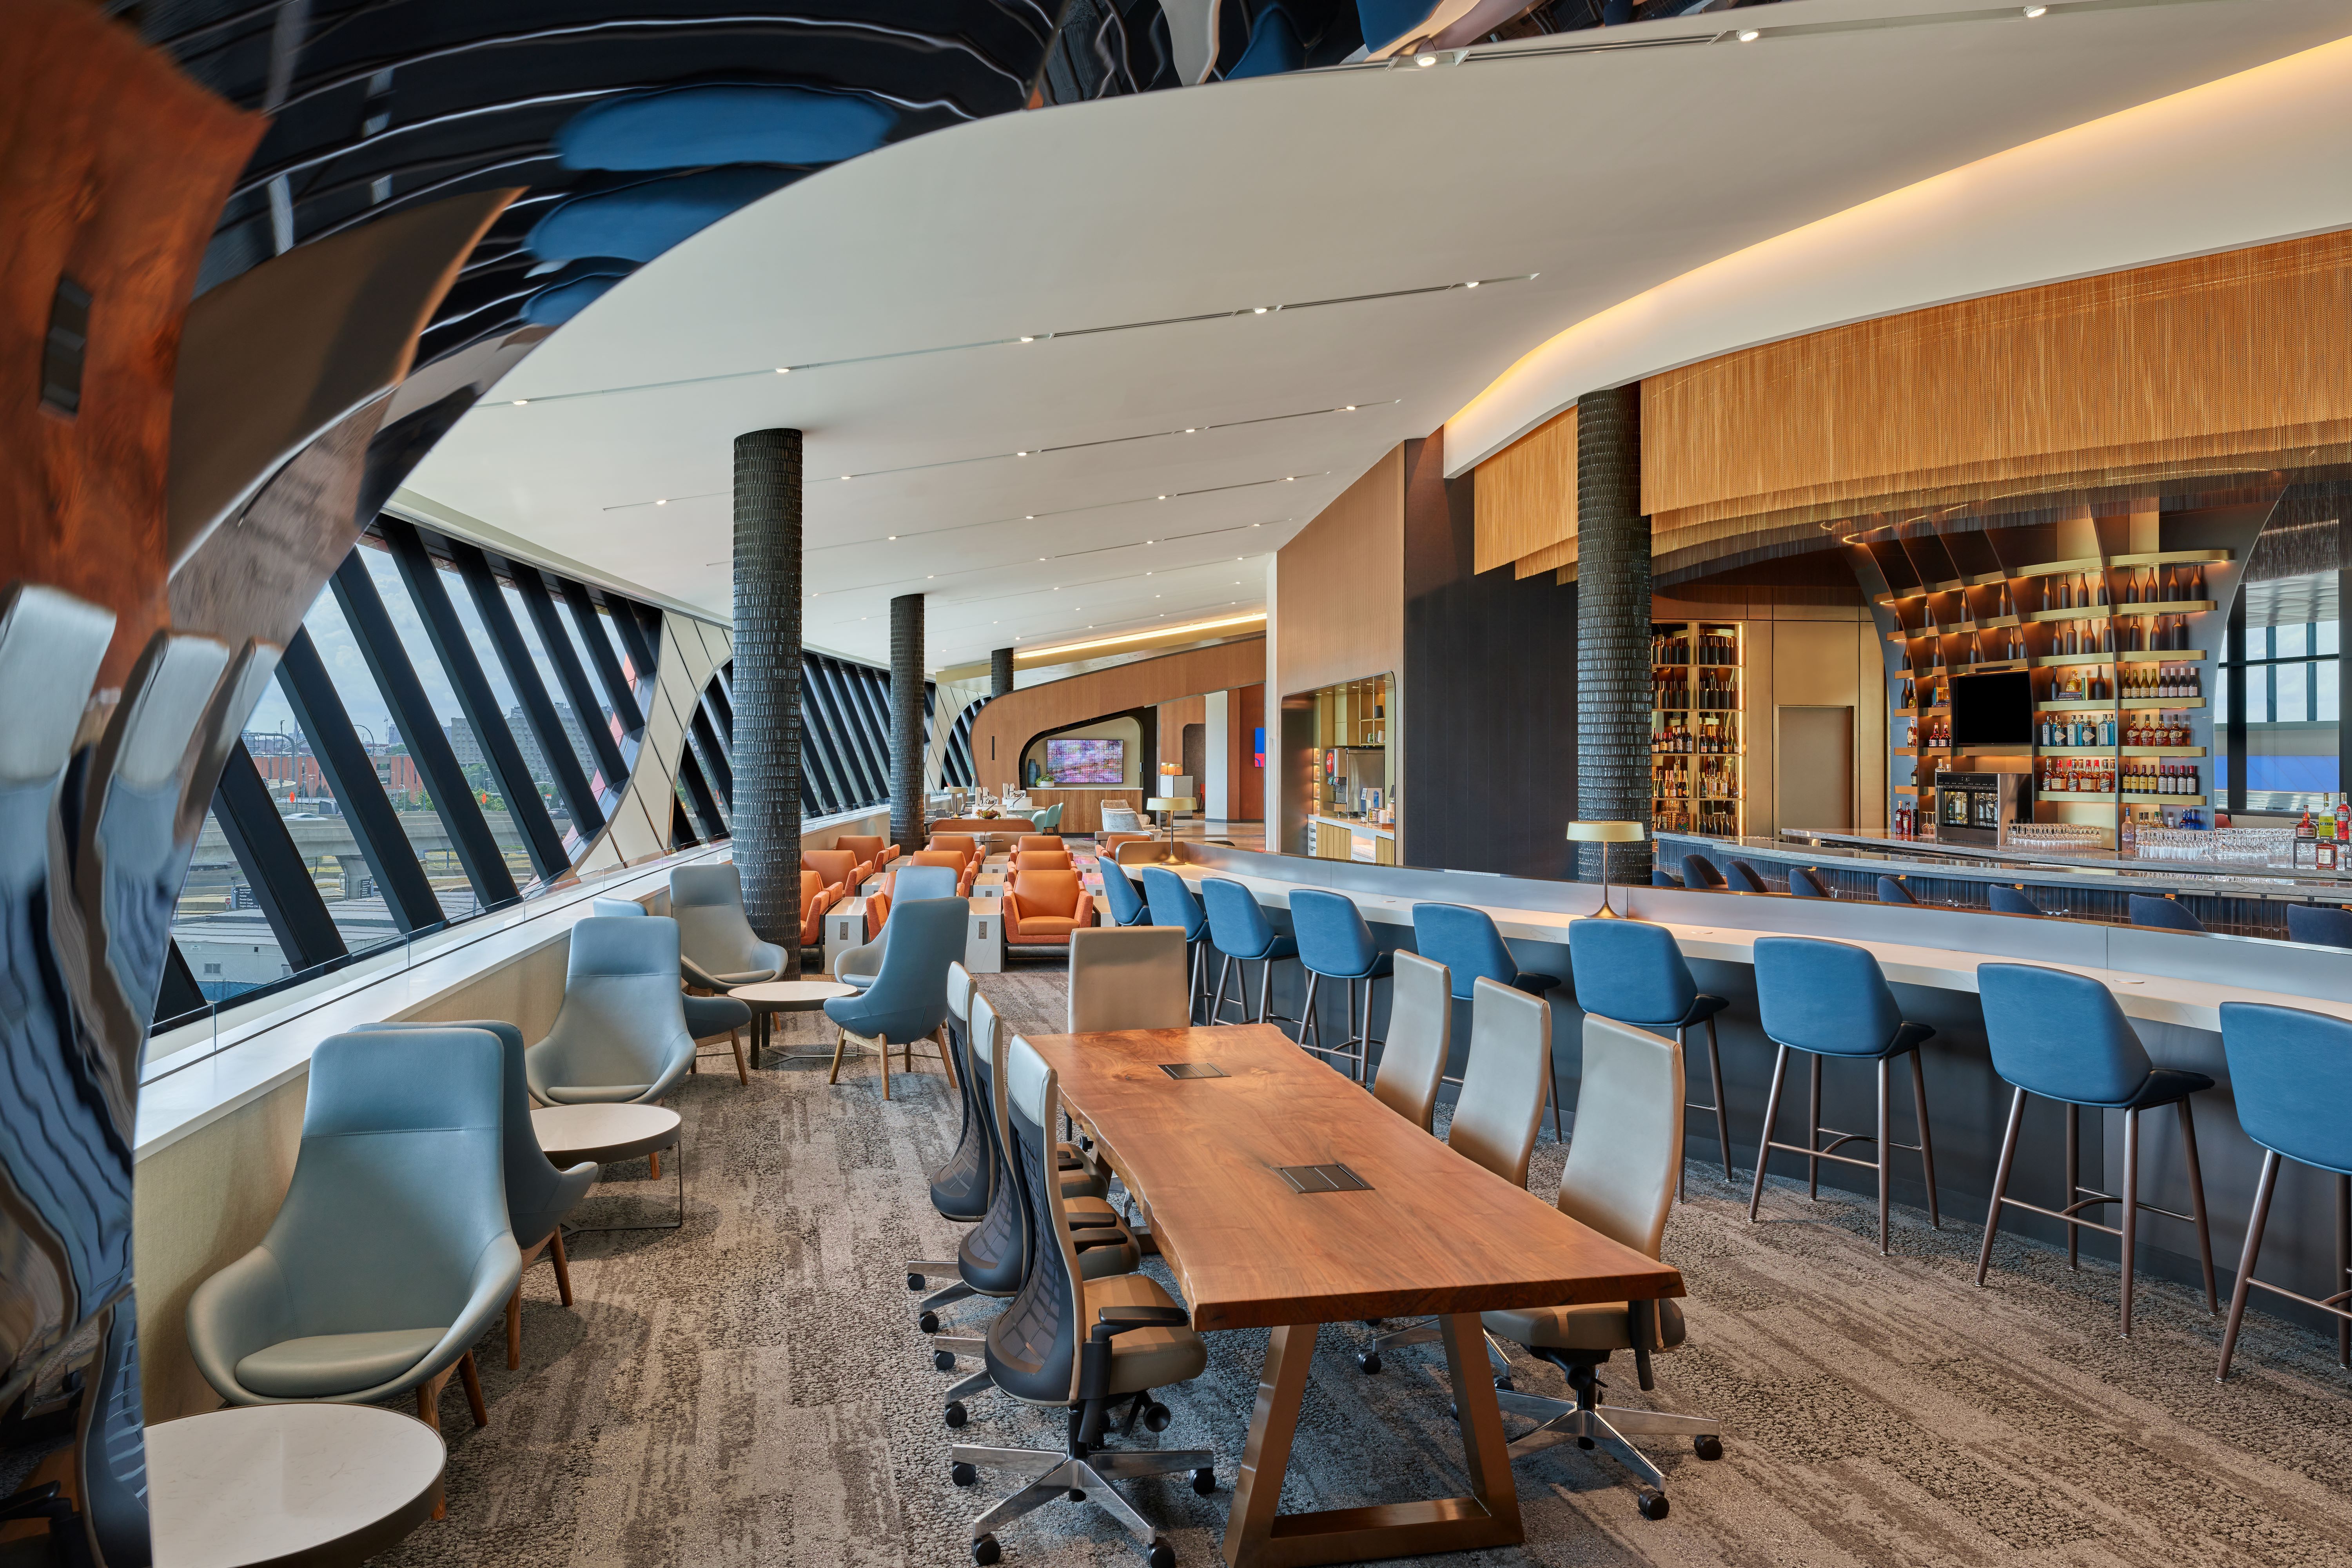 Inside Delta Air Lines' new SkyClub lounge.